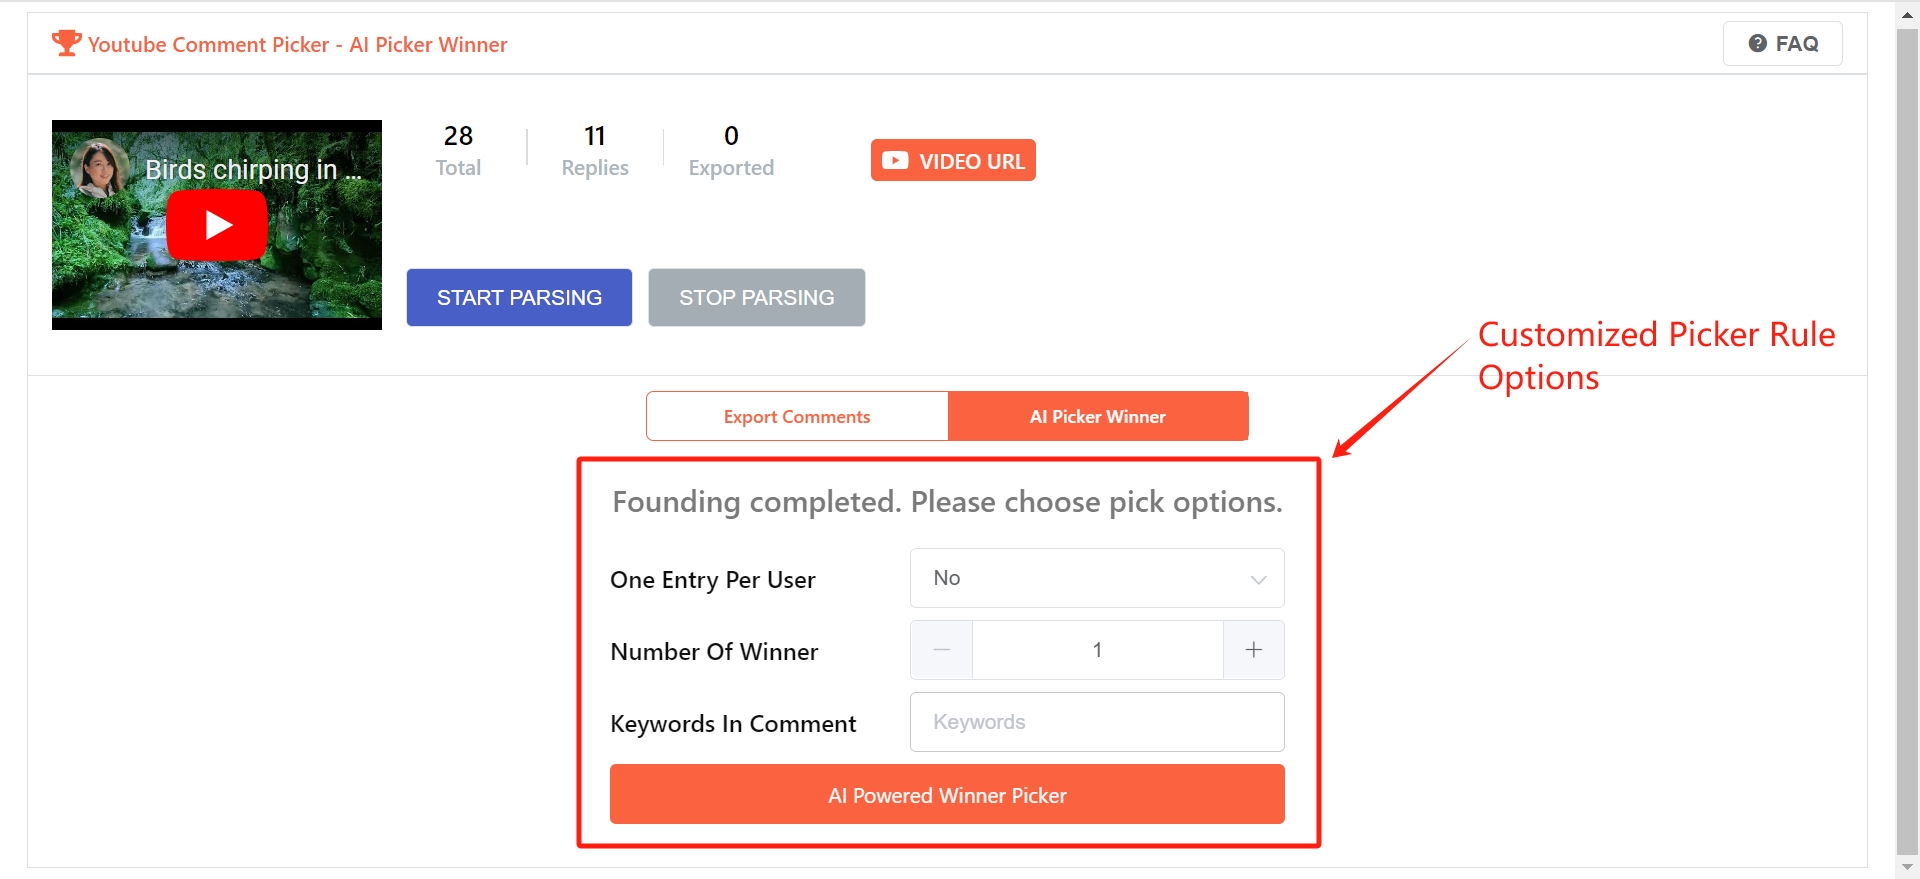 Comment Picker Youtube Customized Picker Rule Options